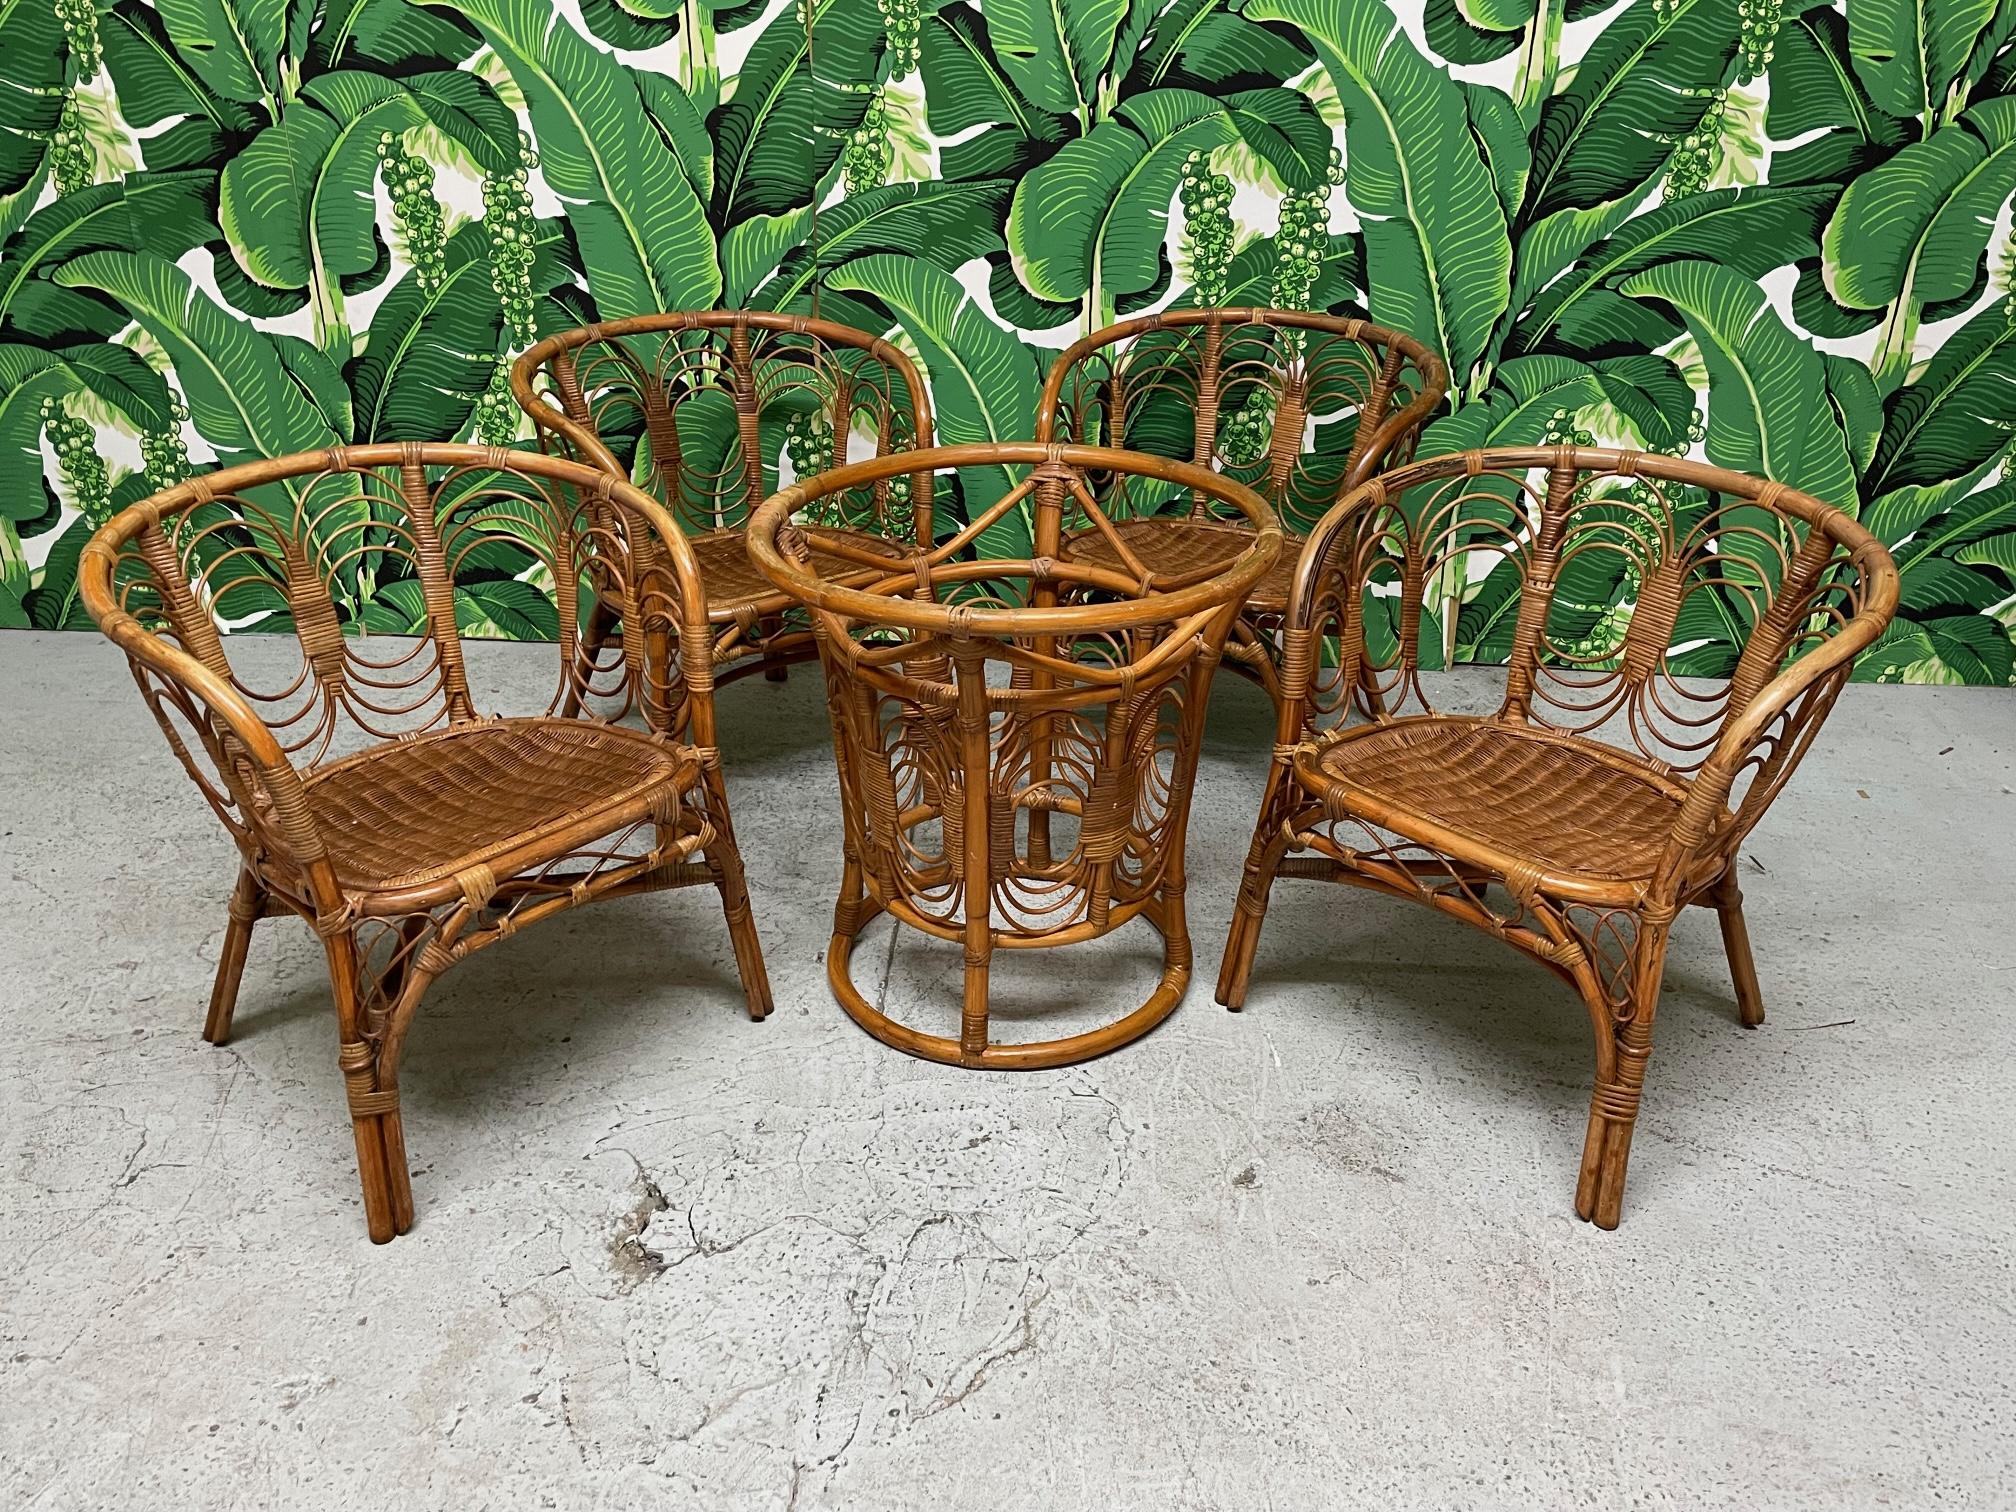 Vintage rattan dining chairs features glass top round table and 4 chairs with wicker seats. Great as a game table or breakfast set. Pedestal base with 42